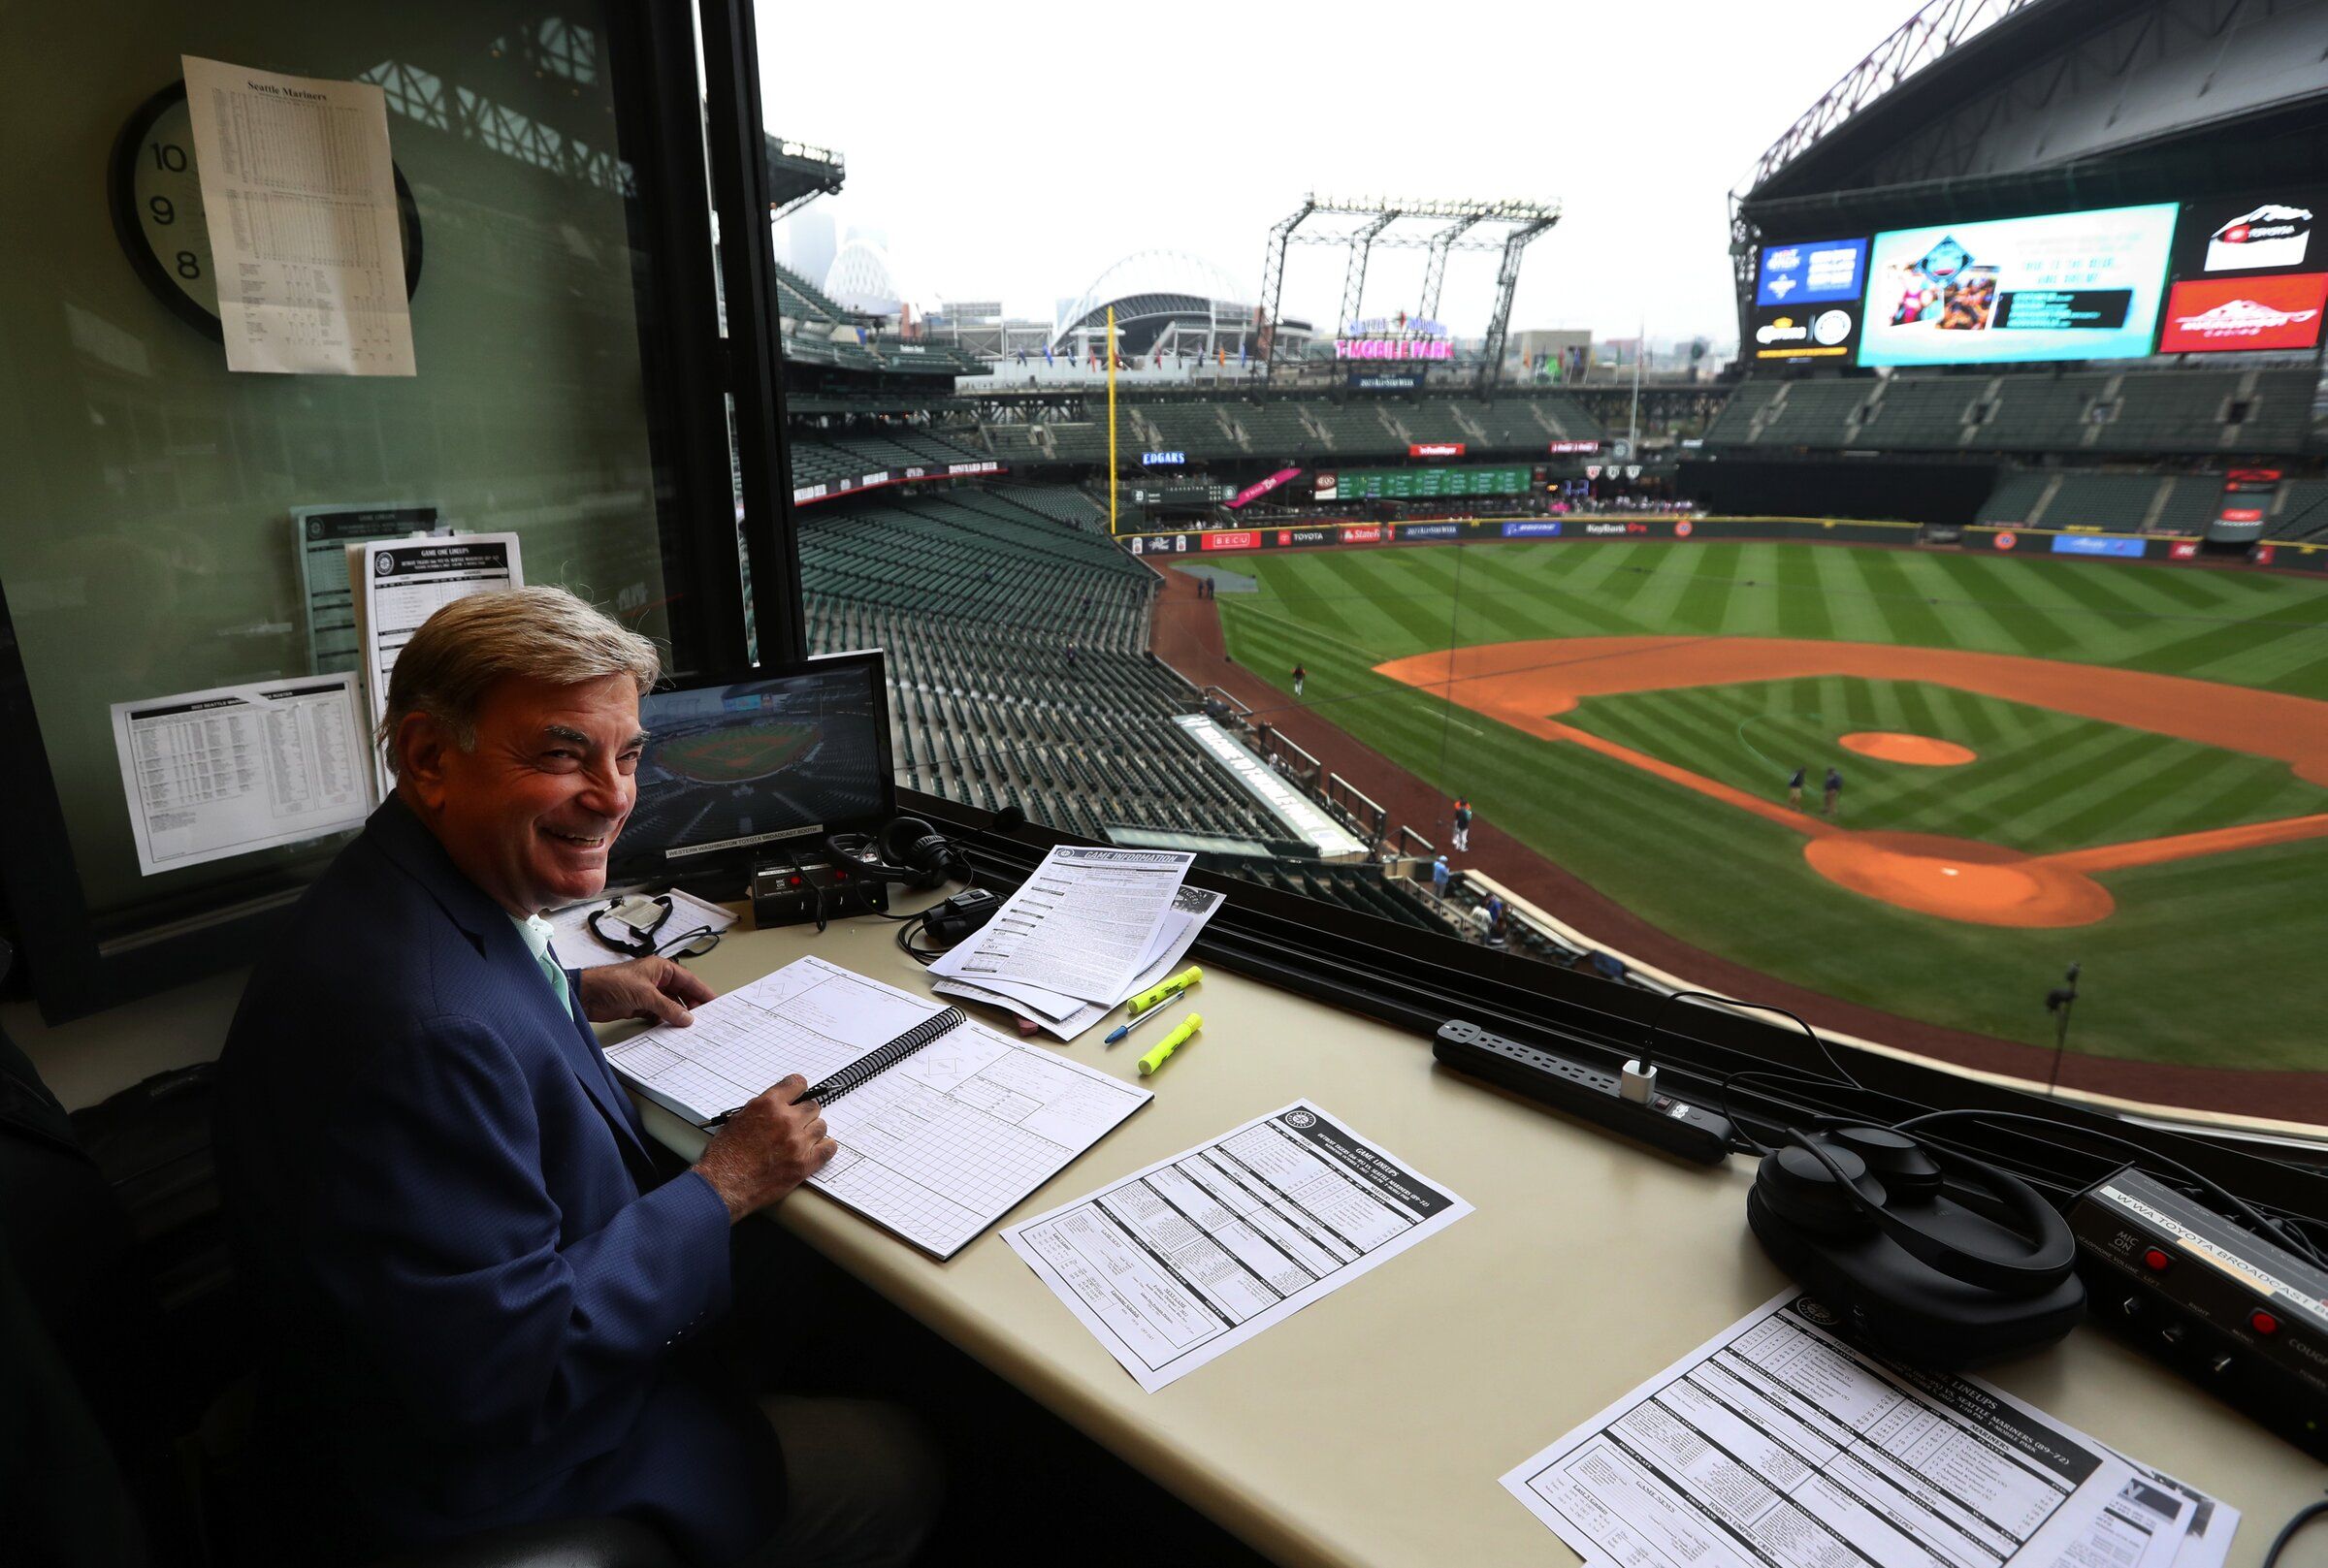 Rough stretch for Rick Rizzs, but longtime Mariners broadcaster very, very, very lucky The Seattle Times